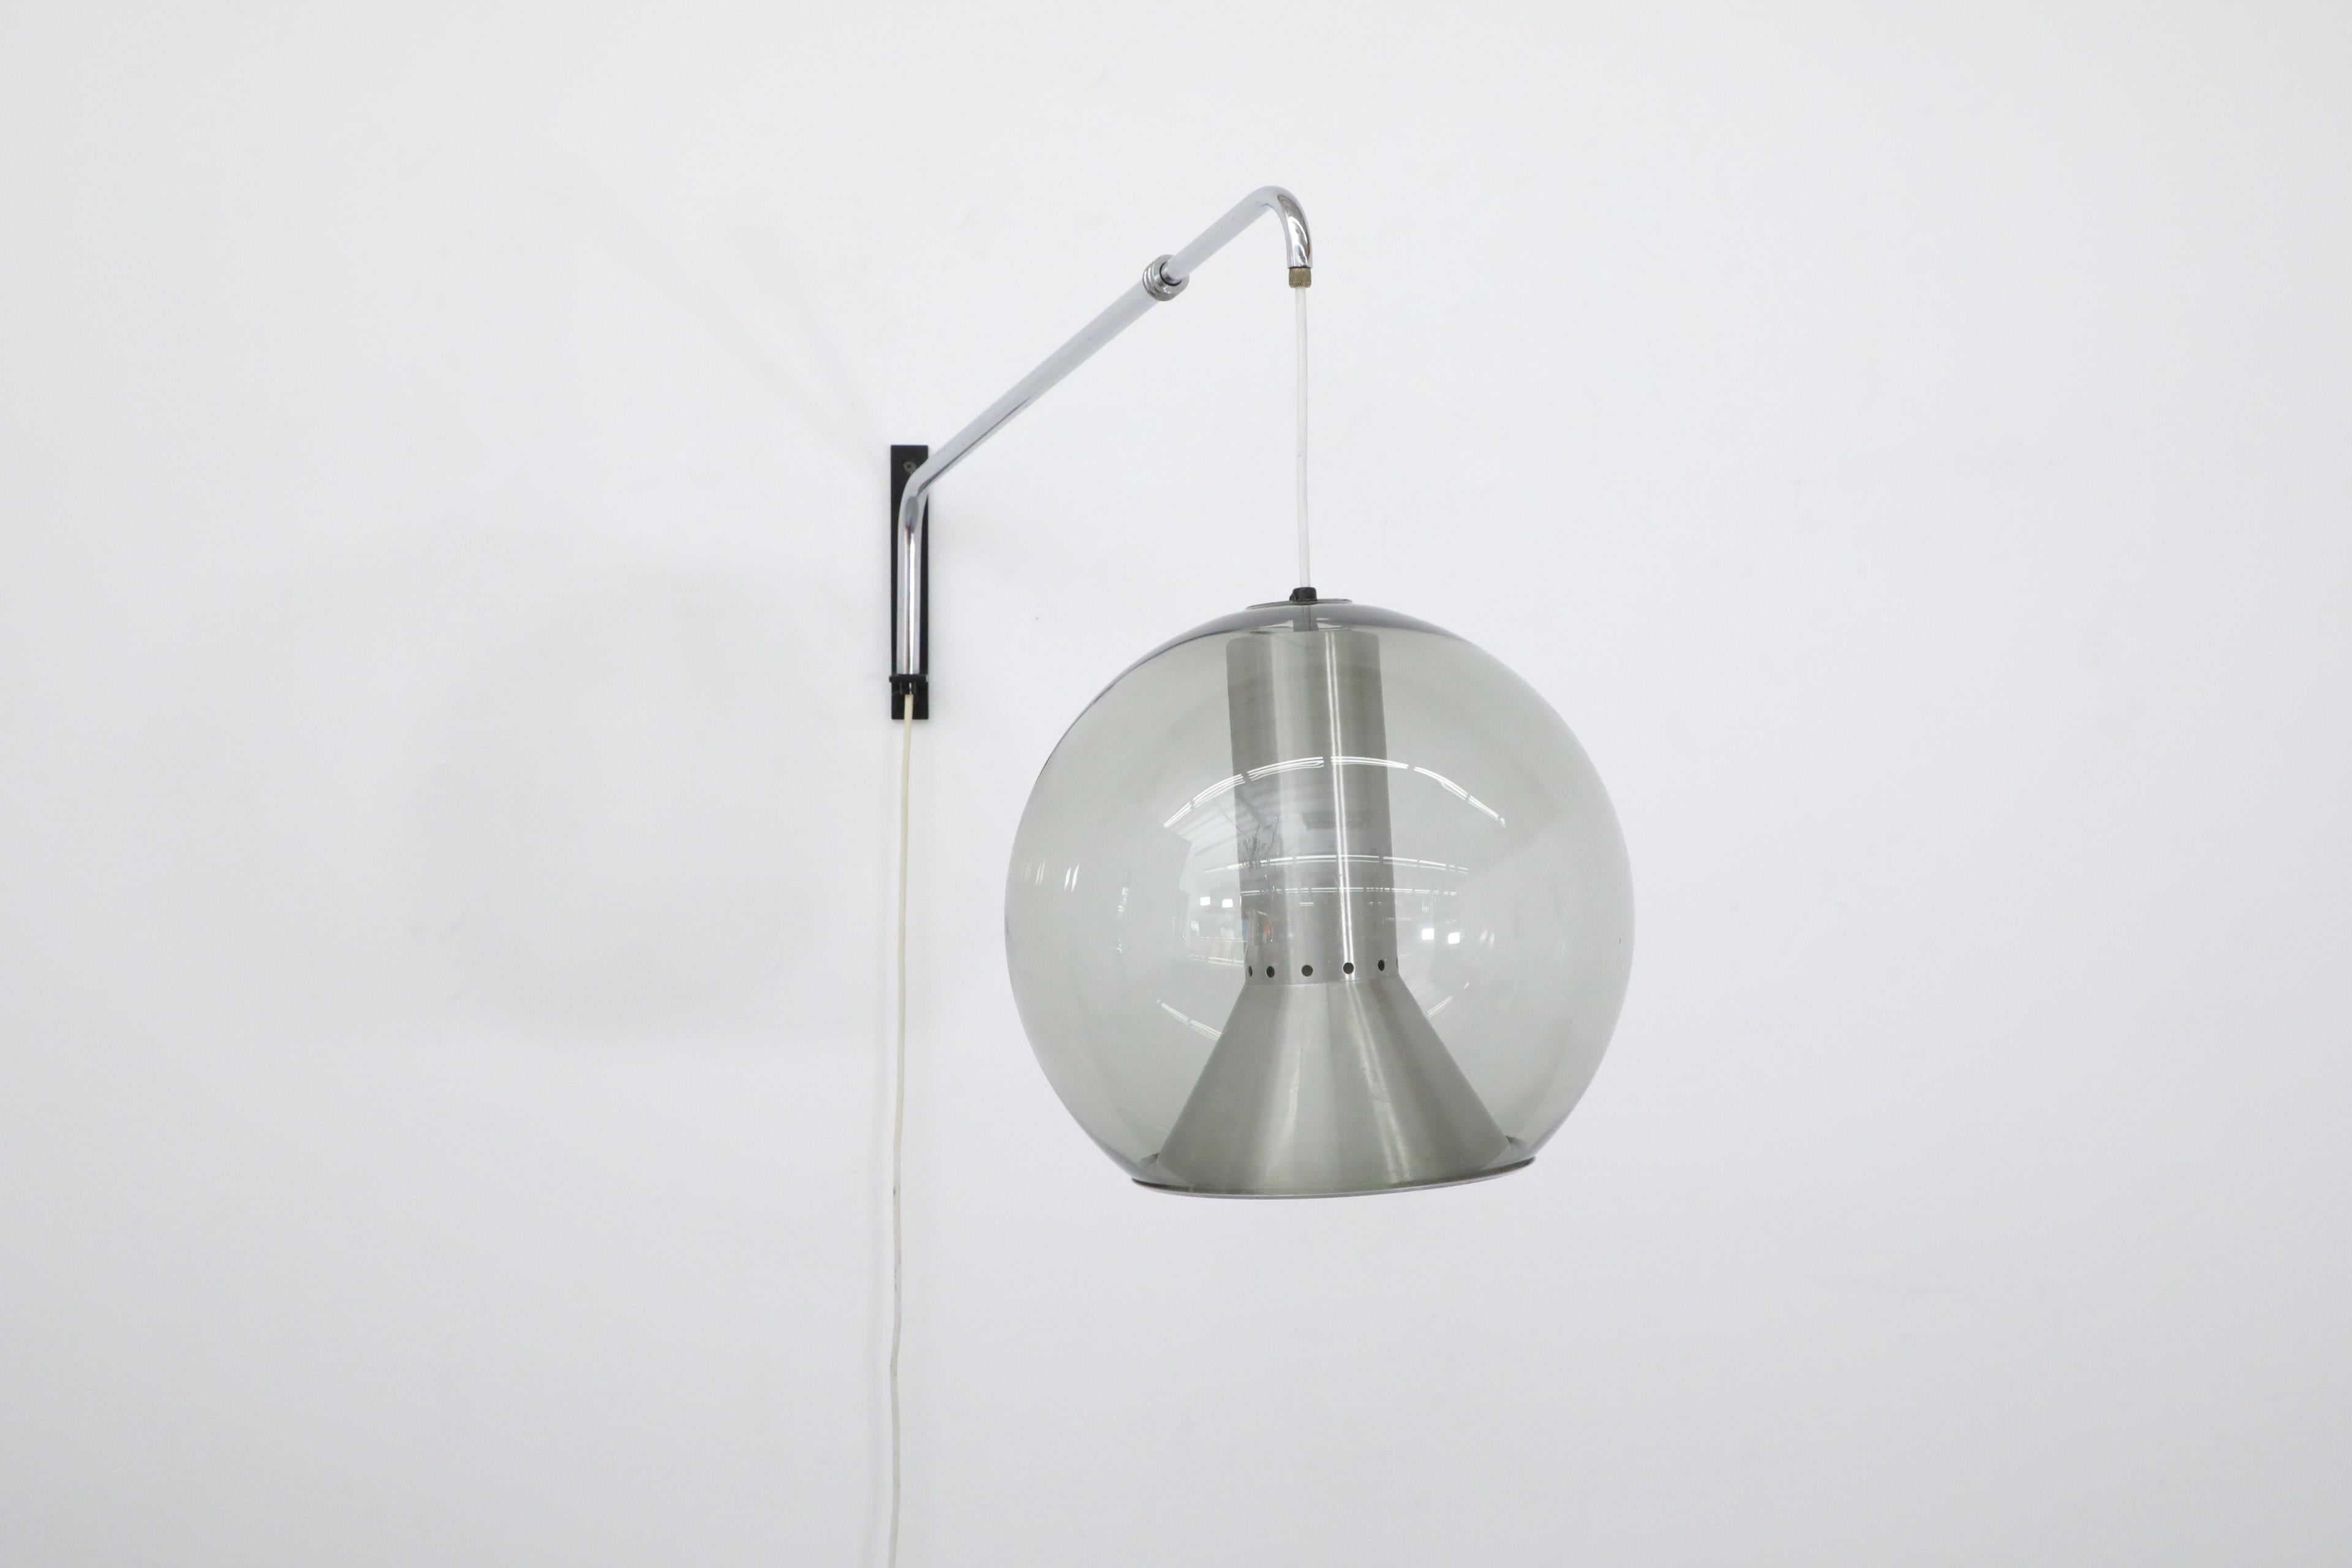 Incredible Frank Ligtelijn wall lamp with blown smoked glass globe for Raak. A beautiful rare wall light with extendable and swinging brushed chrome stem on thin black enameled metal mount. There is a trumpet shaped spun aluminum inner shade. The